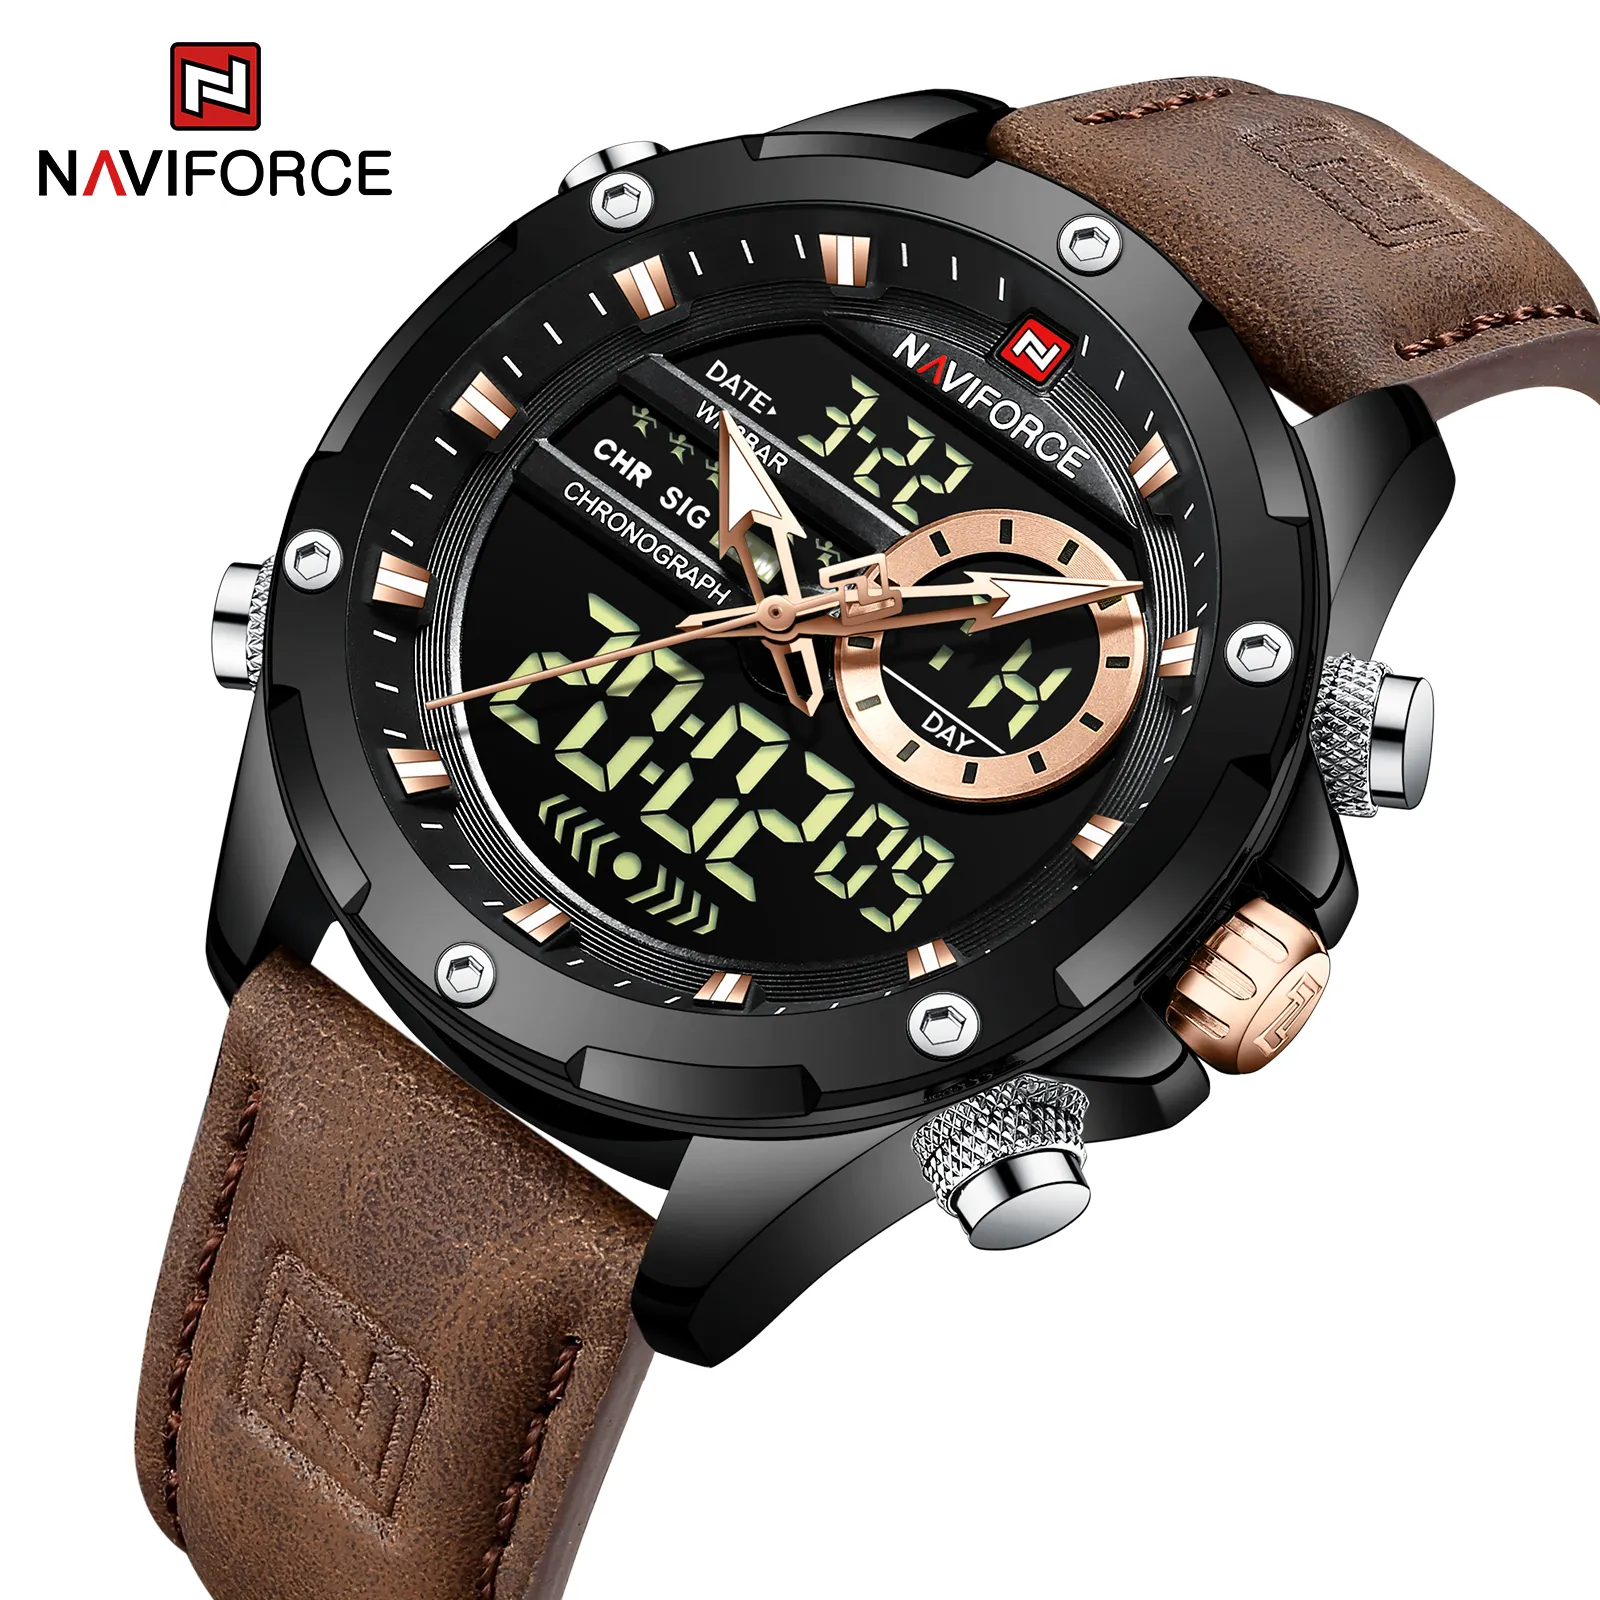 Top Level Quality Watch NAVIFORCE 9208 New Arrival Men High End Quartz Wrist Watches For Male With Wholesale Cheap Price